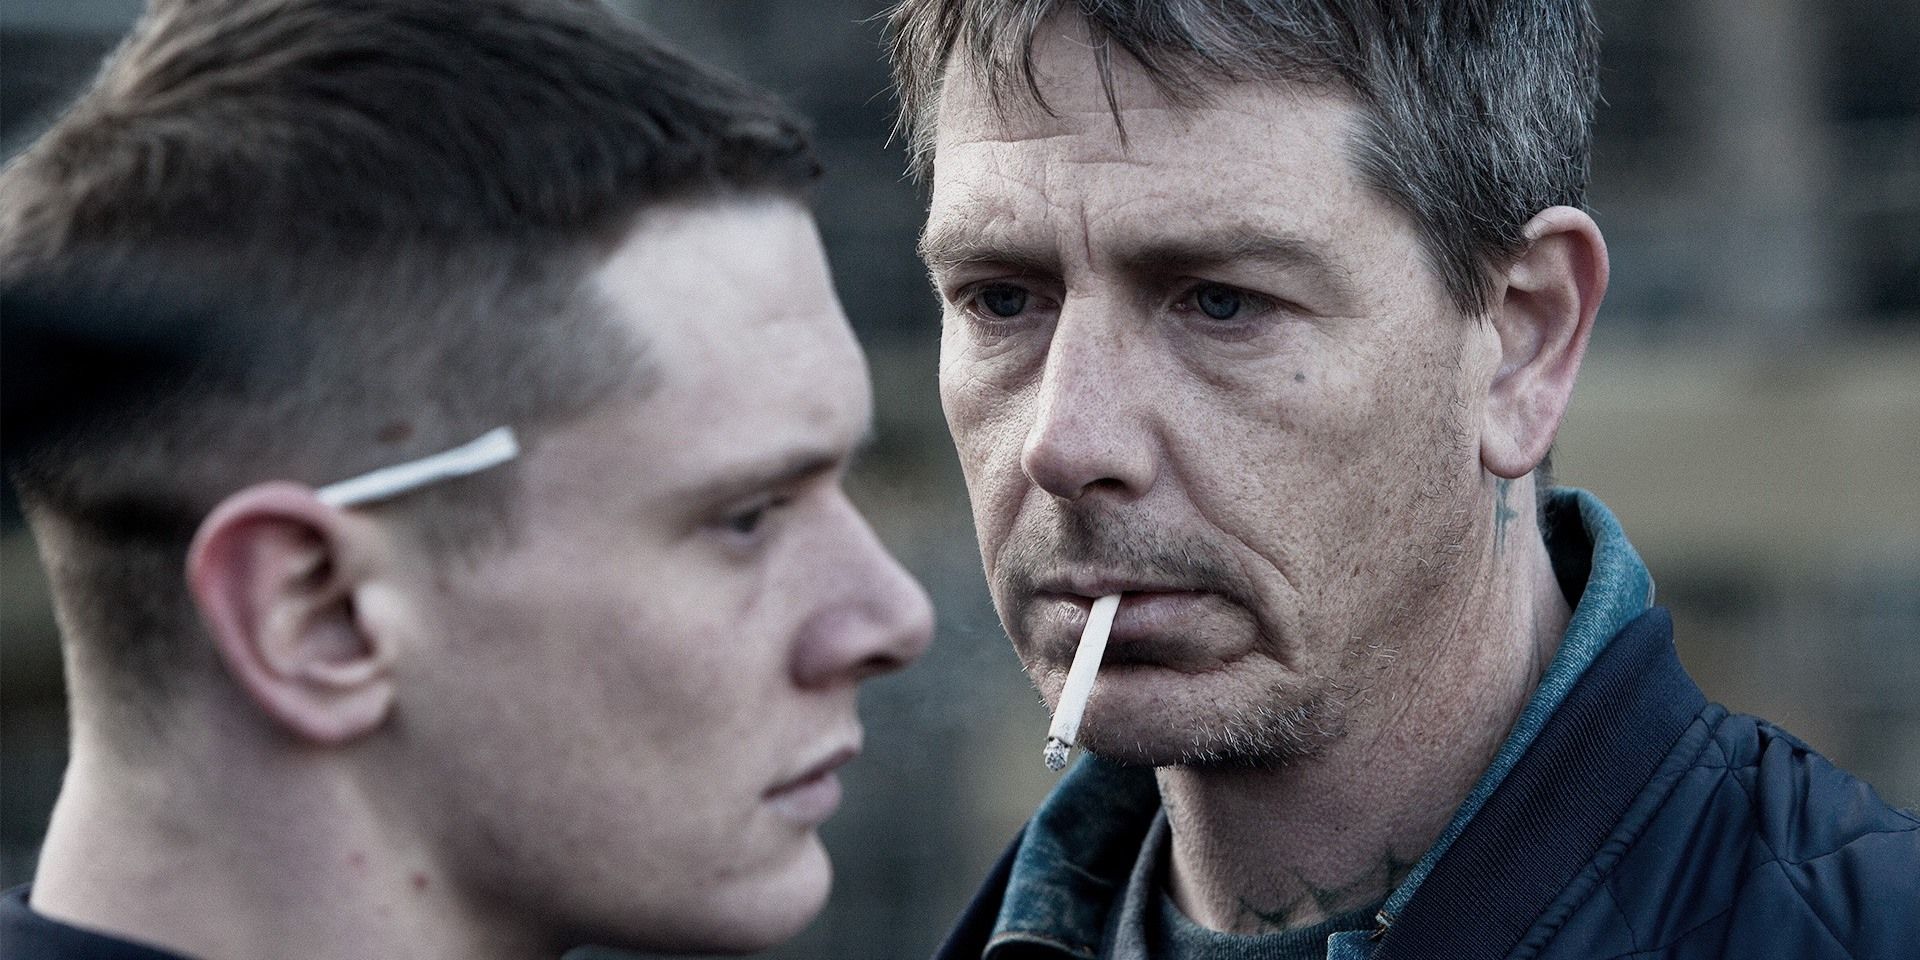 Eric and Neville talking in Starred Up.